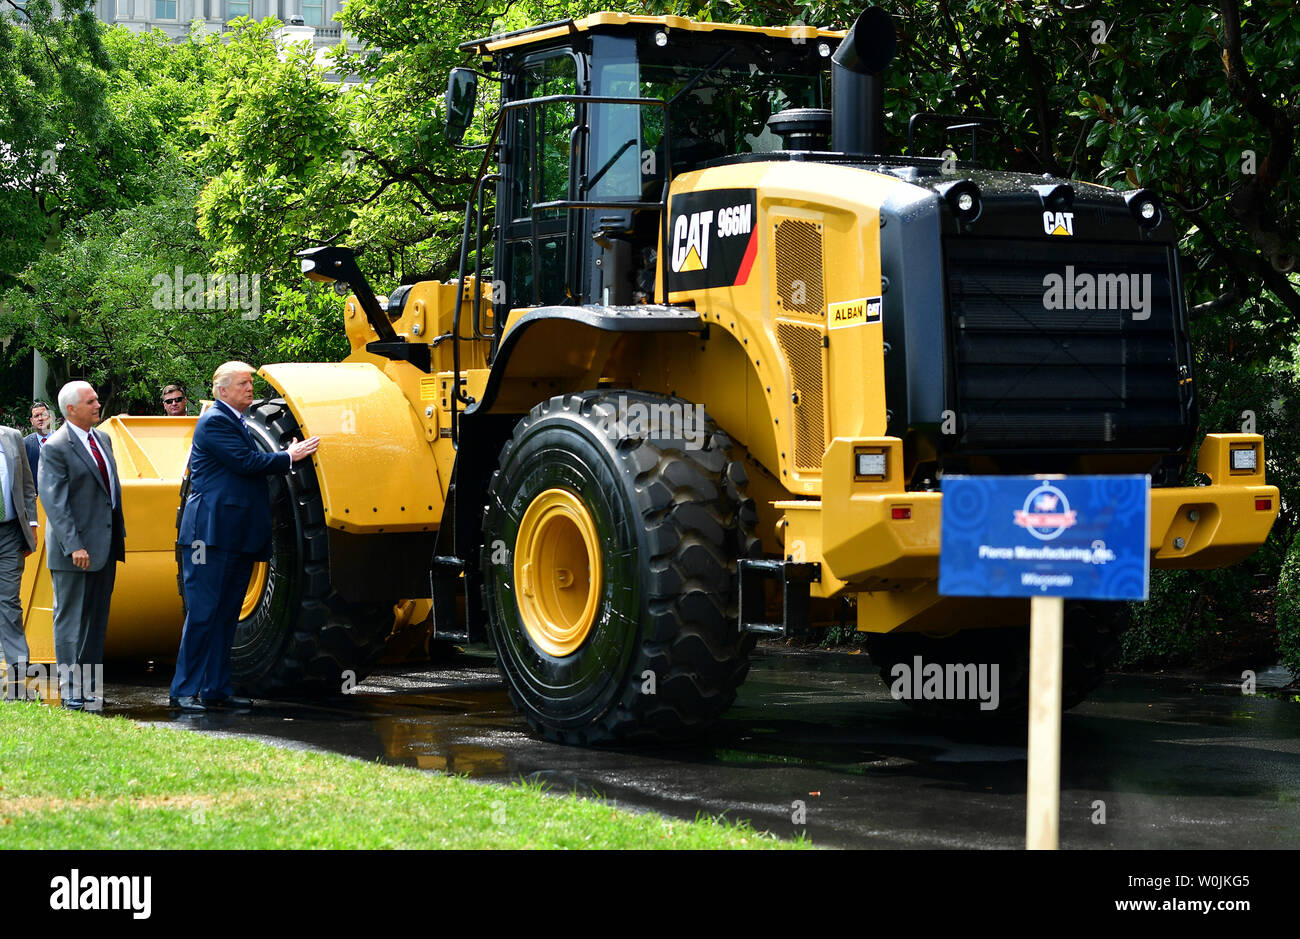 President Donald Trump (R) and Vice President Mike Pence inspect a Caterpillar front end loader during a Made in America product showcase, on the South Lawn of the White House in Washington, D.C. on July 17, 2017. Trump hosted manufacturers and corporations for all 50 states to highlight American made products. Photo by Kevin Dietsch/UPI Stock Photo